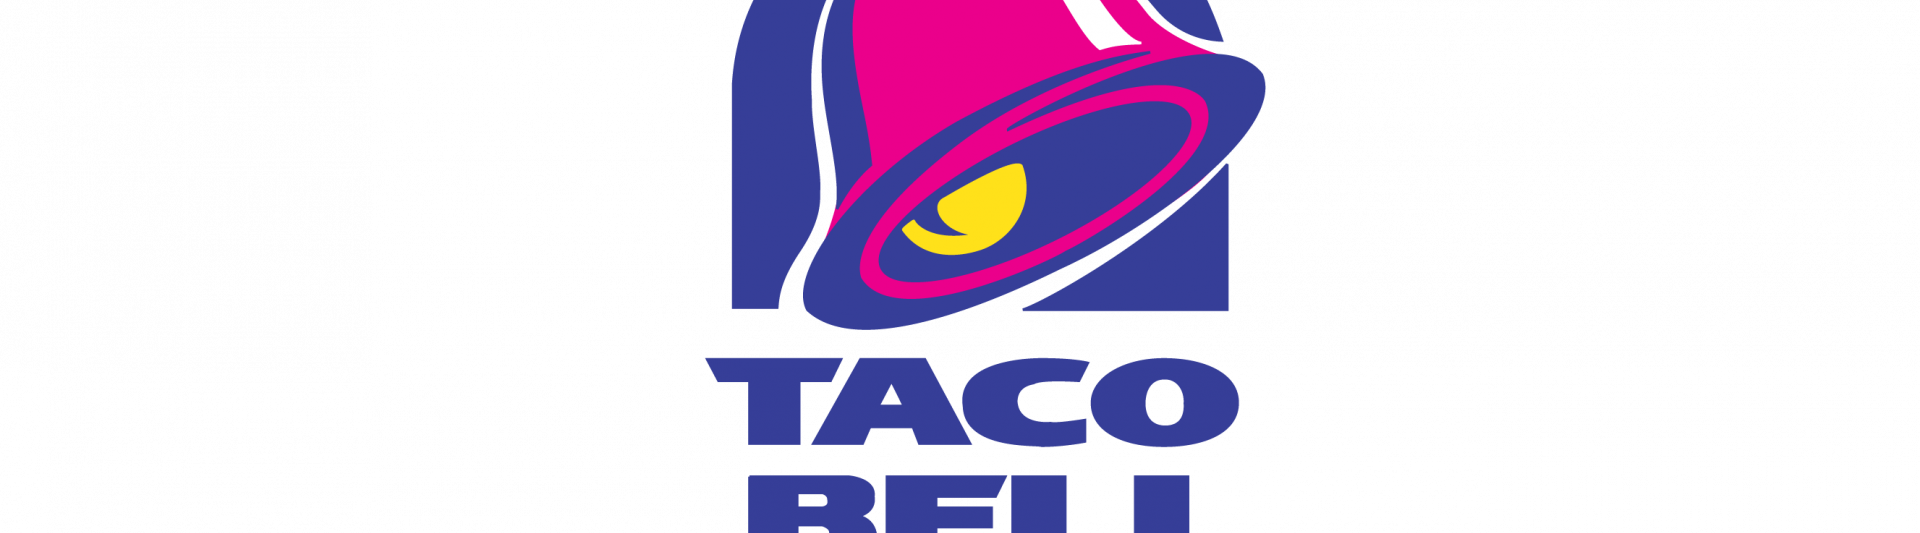 TACO BELL